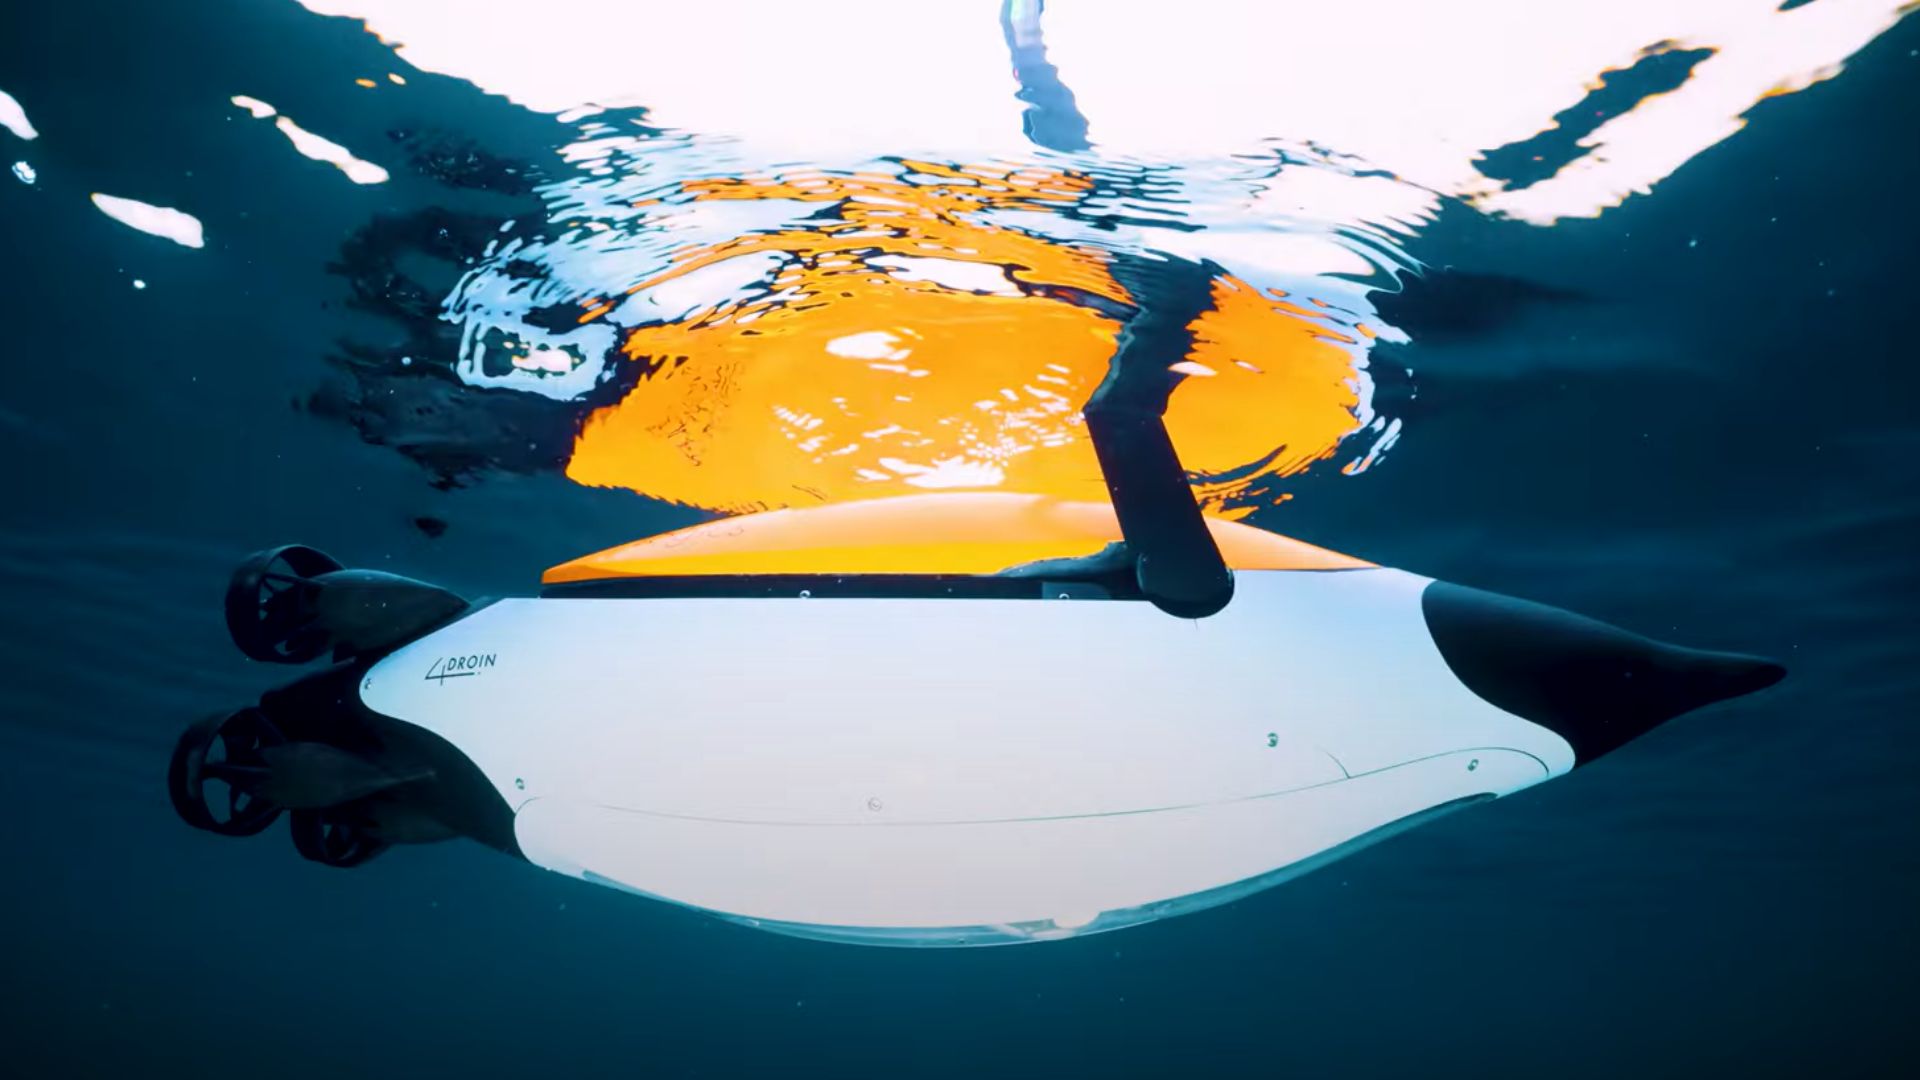 This Penguin-inspired underwater drone can dart through water [Video]